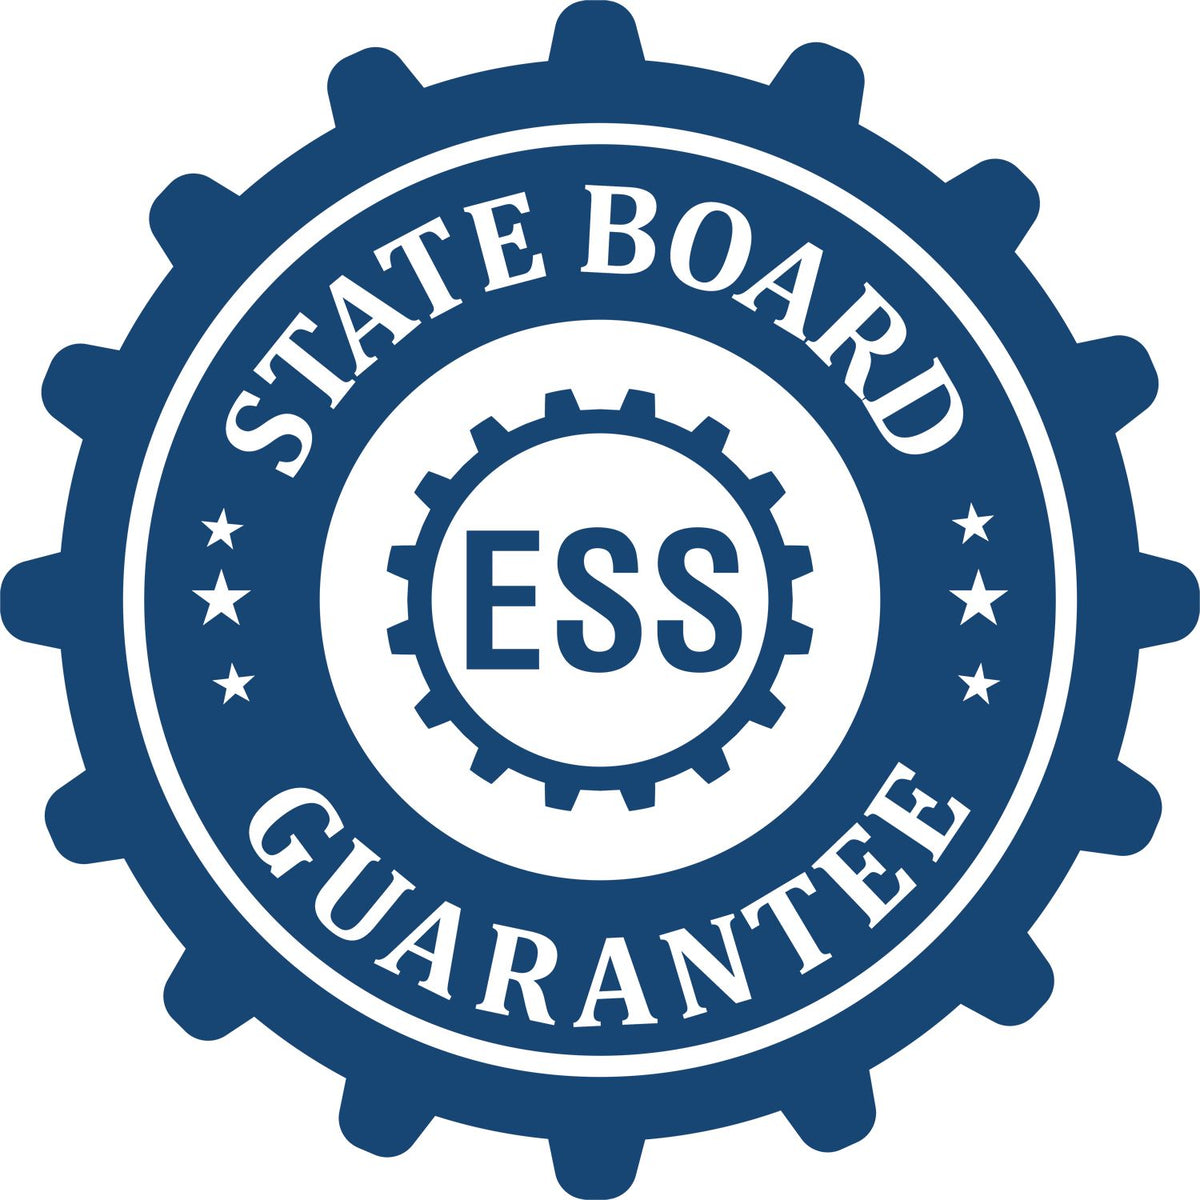 An emblem in a gear shape illustrating a state board guarantee for the Digital Vermont Landscape Architect Stamp product.